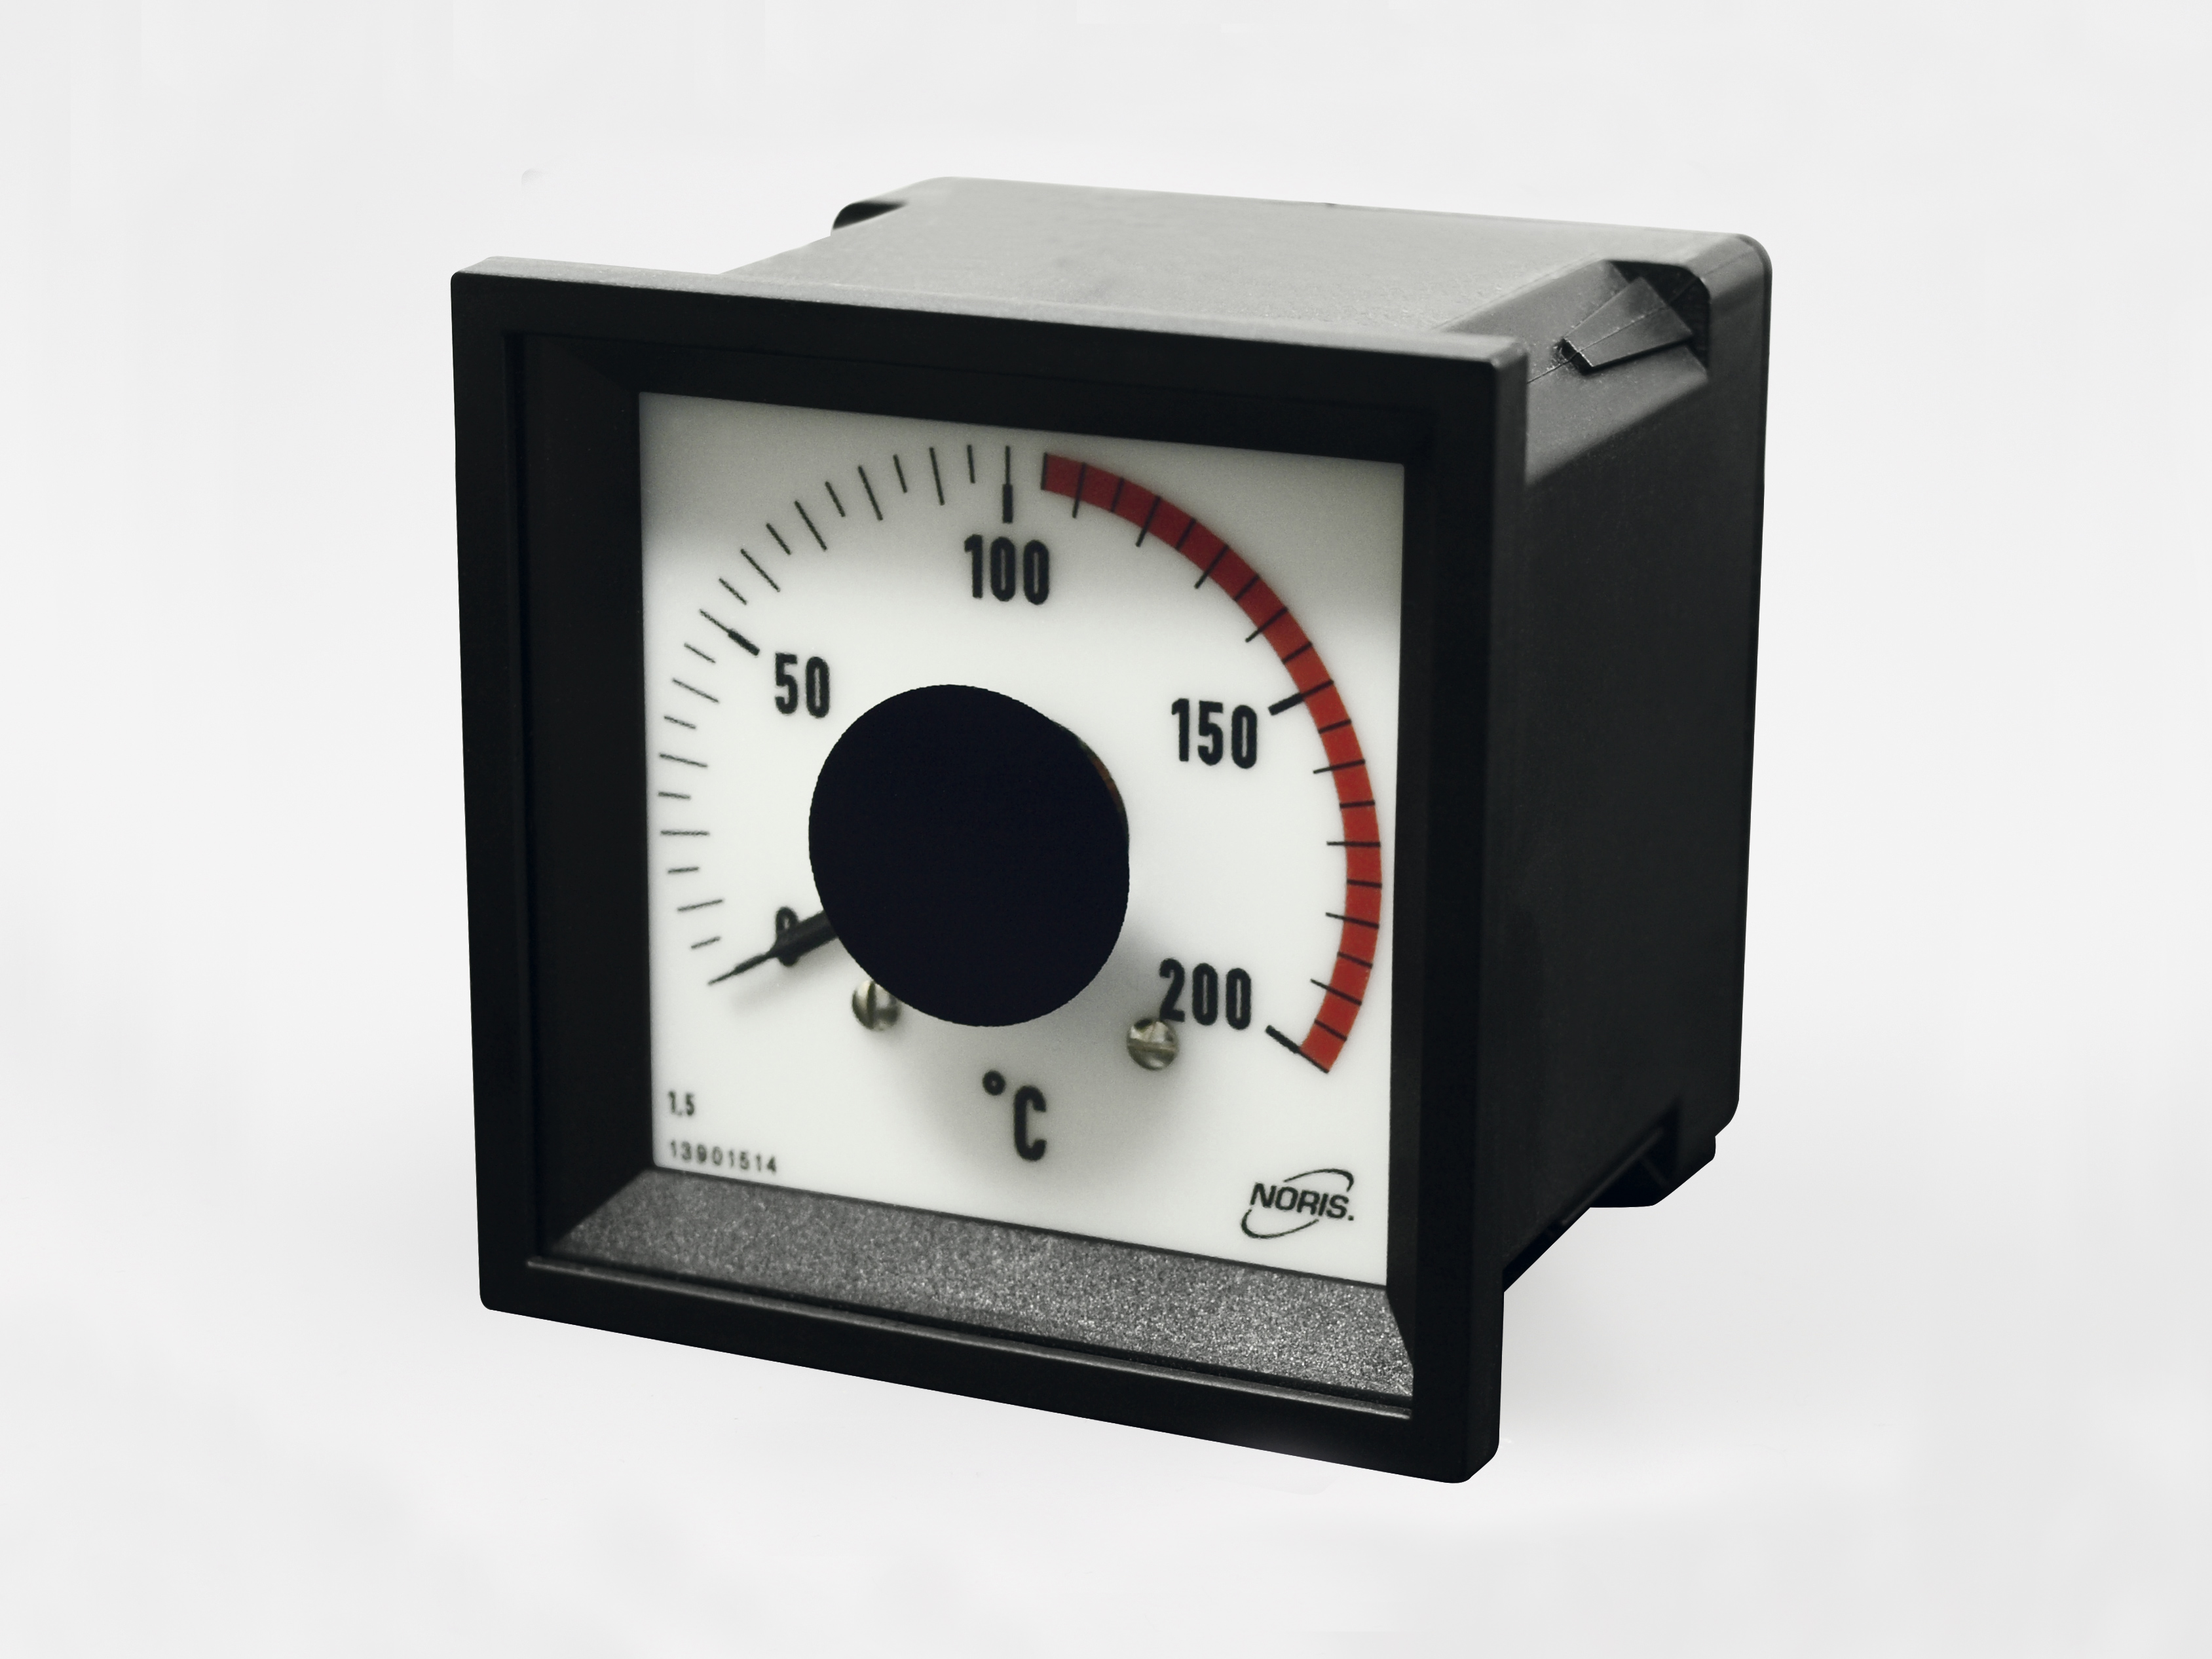 The image shows an analogue Indicator with moving coil element aquare model, white scale